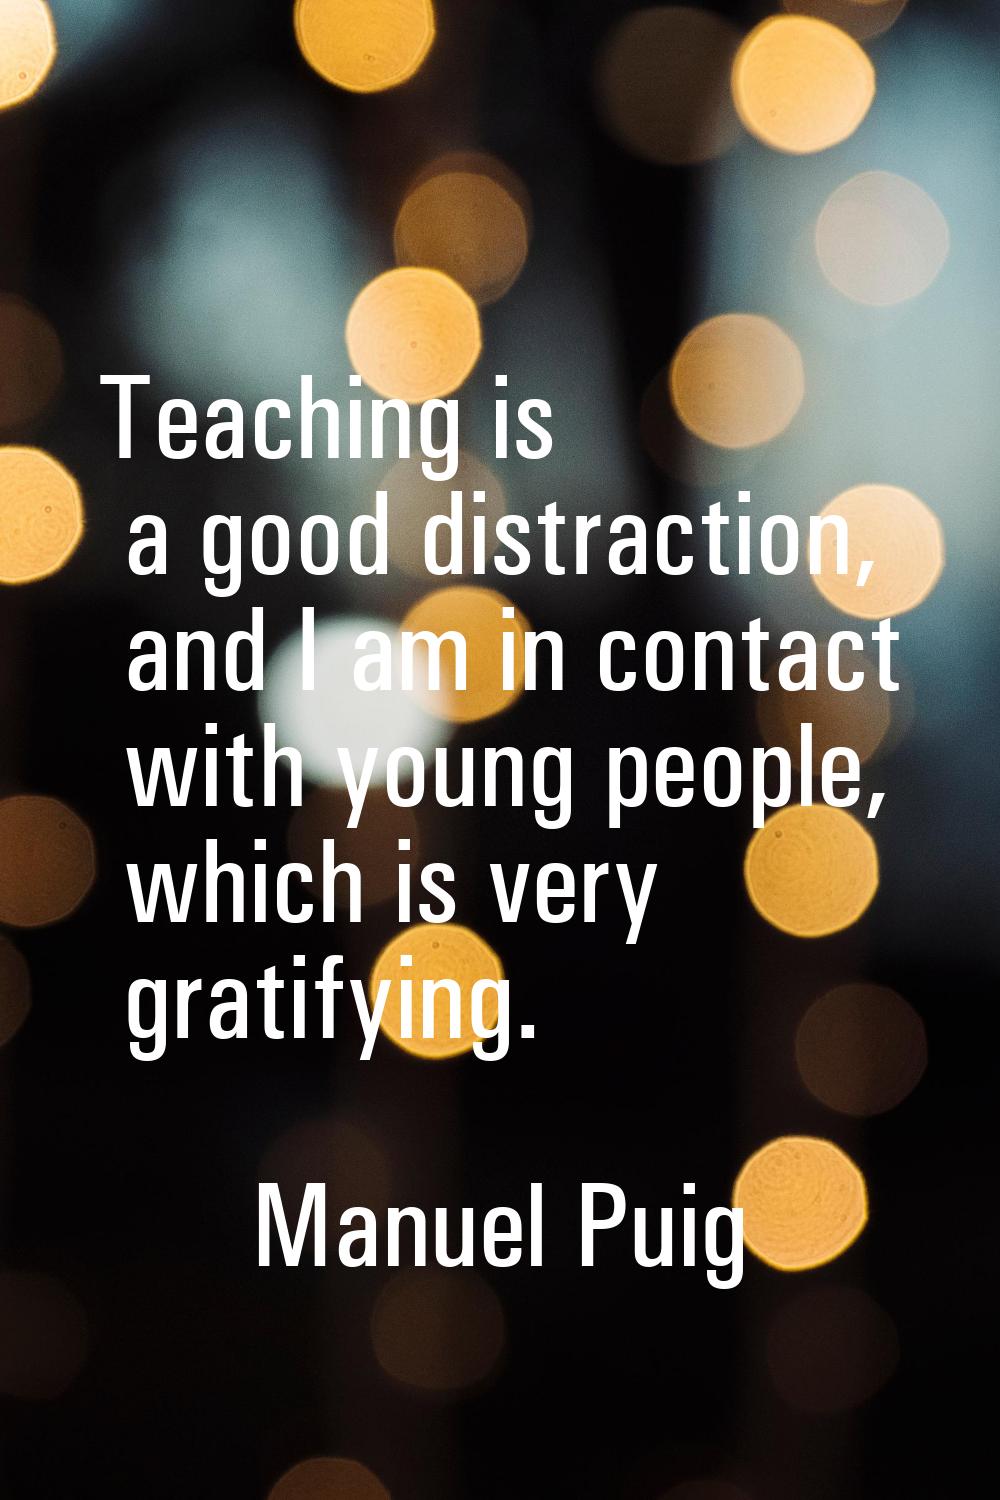 Teaching is a good distraction, and I am in contact with young people, which is very gratifying.